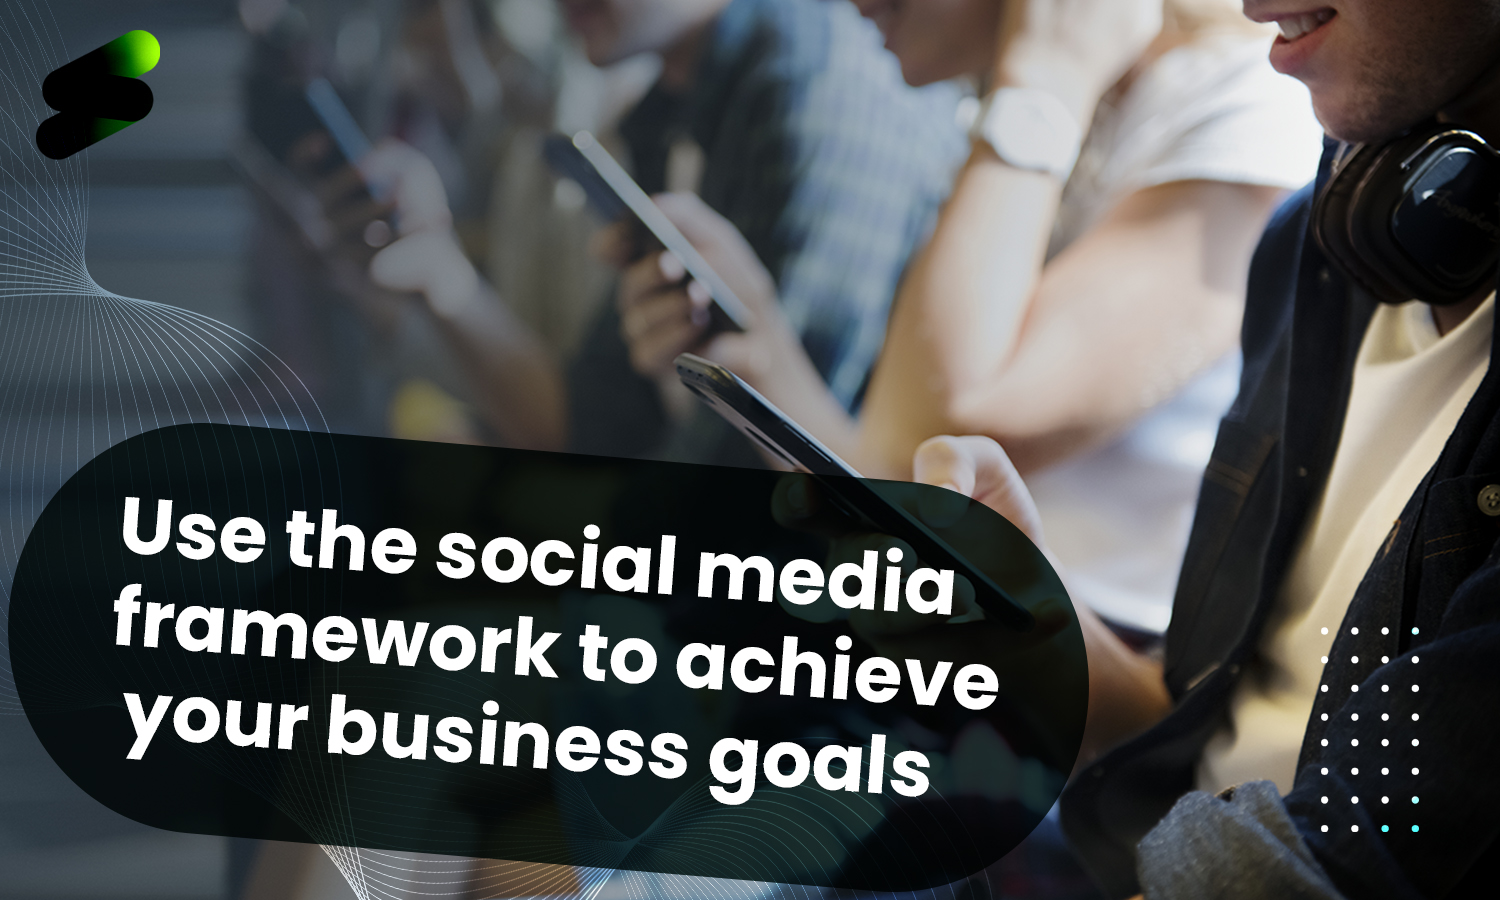 How to use the social media framework to achieve your business goals